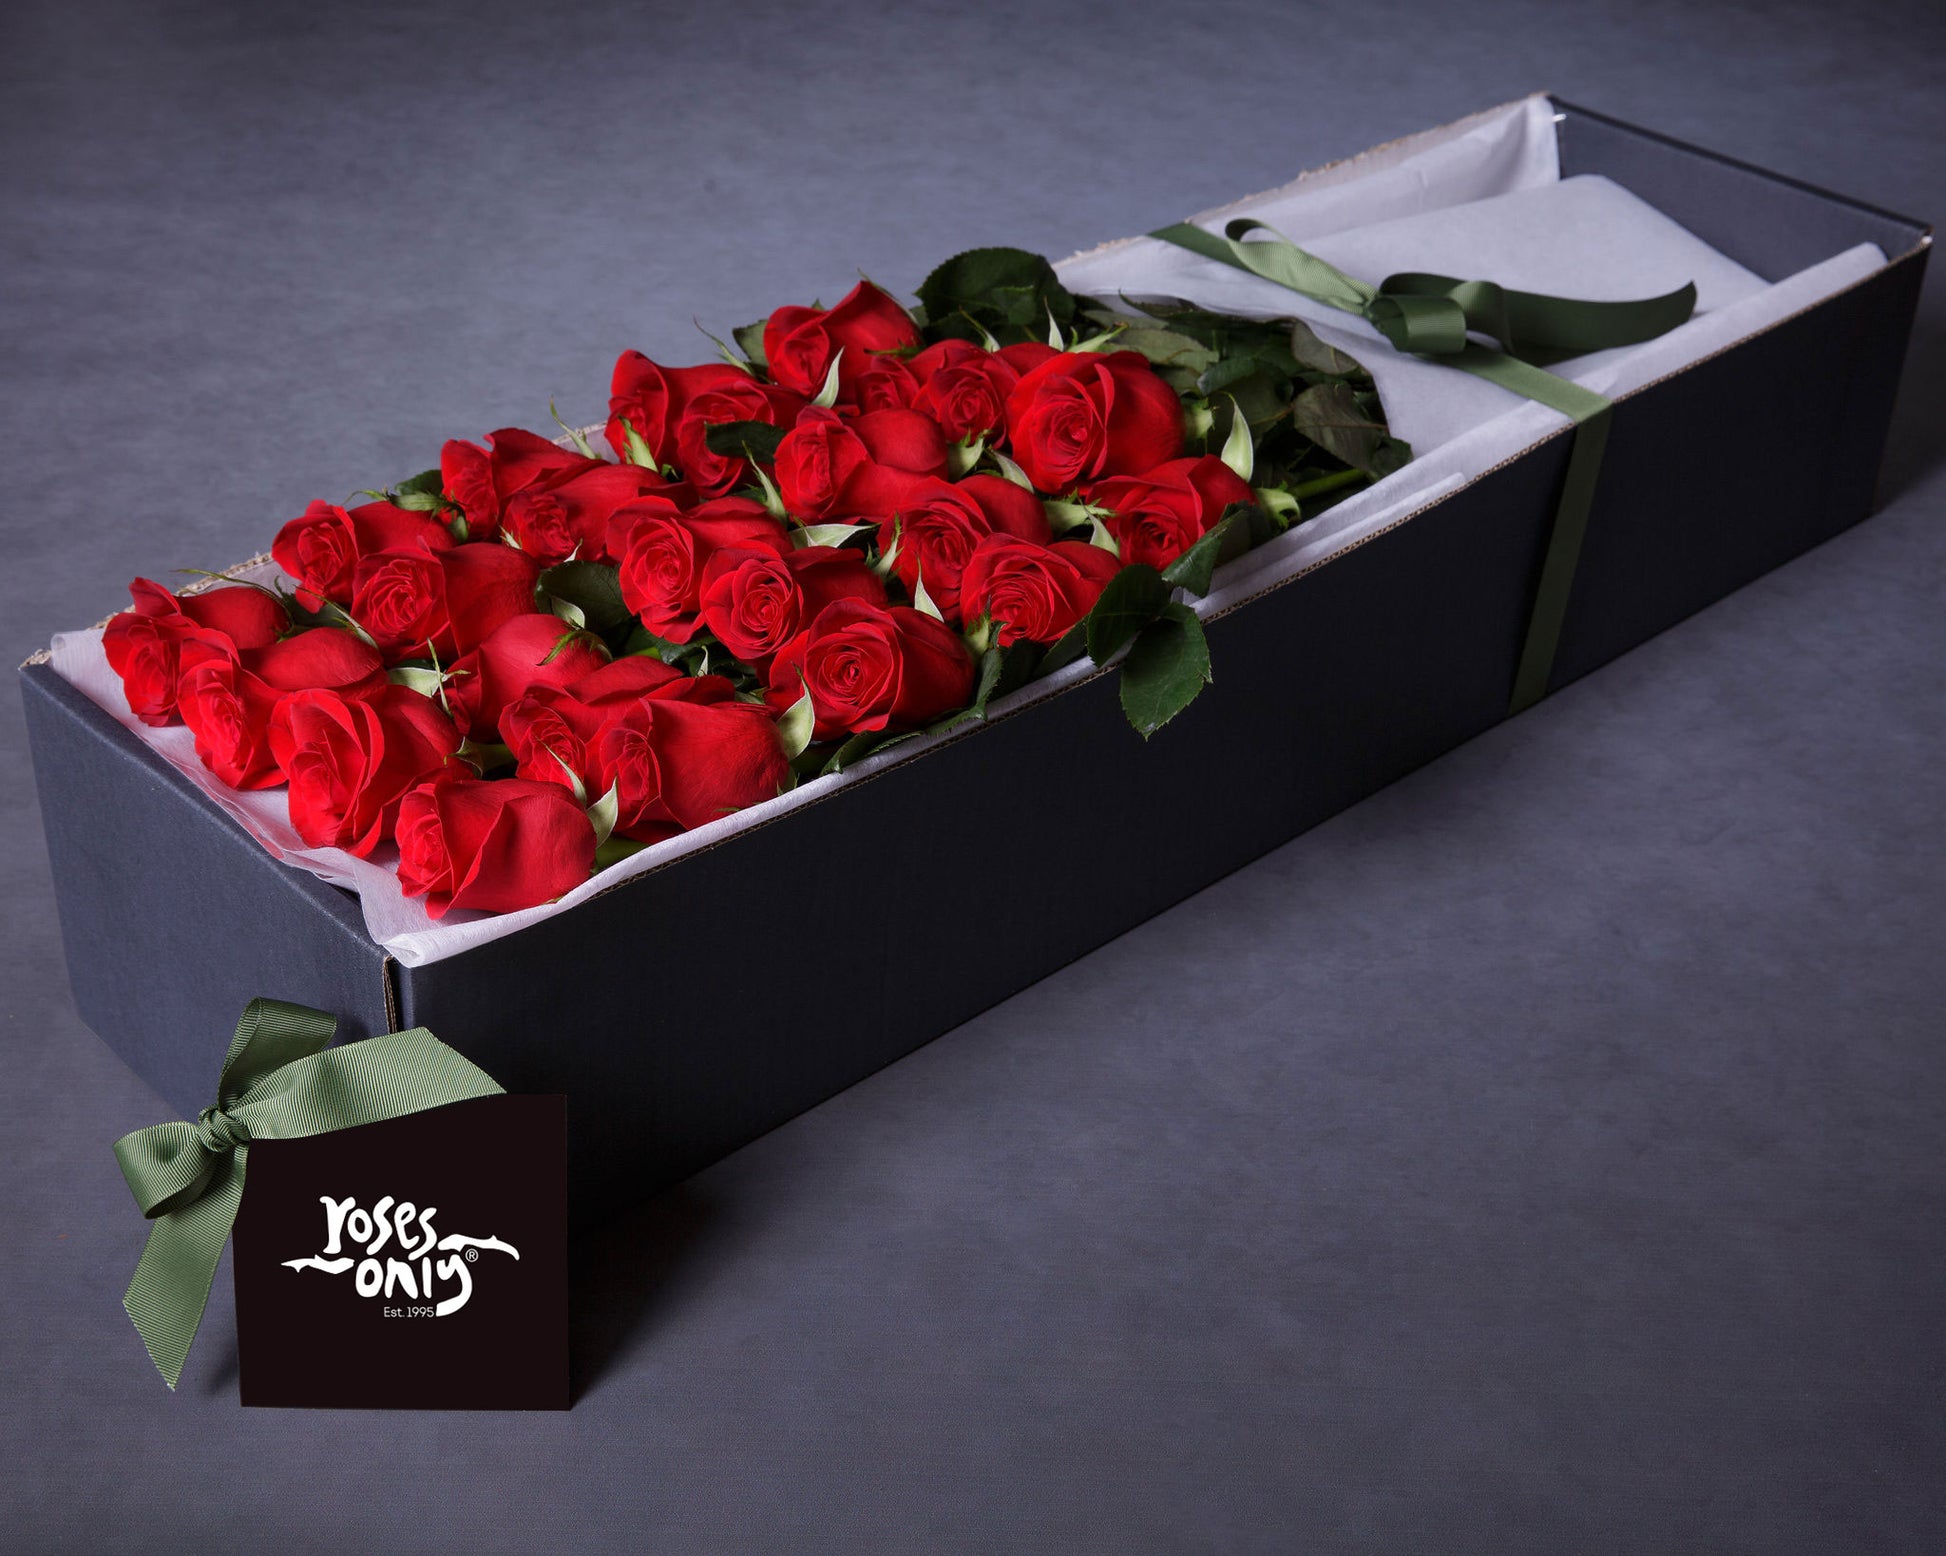 Rose Flower Bouquet with Chocolate Box- 12 Red Roses